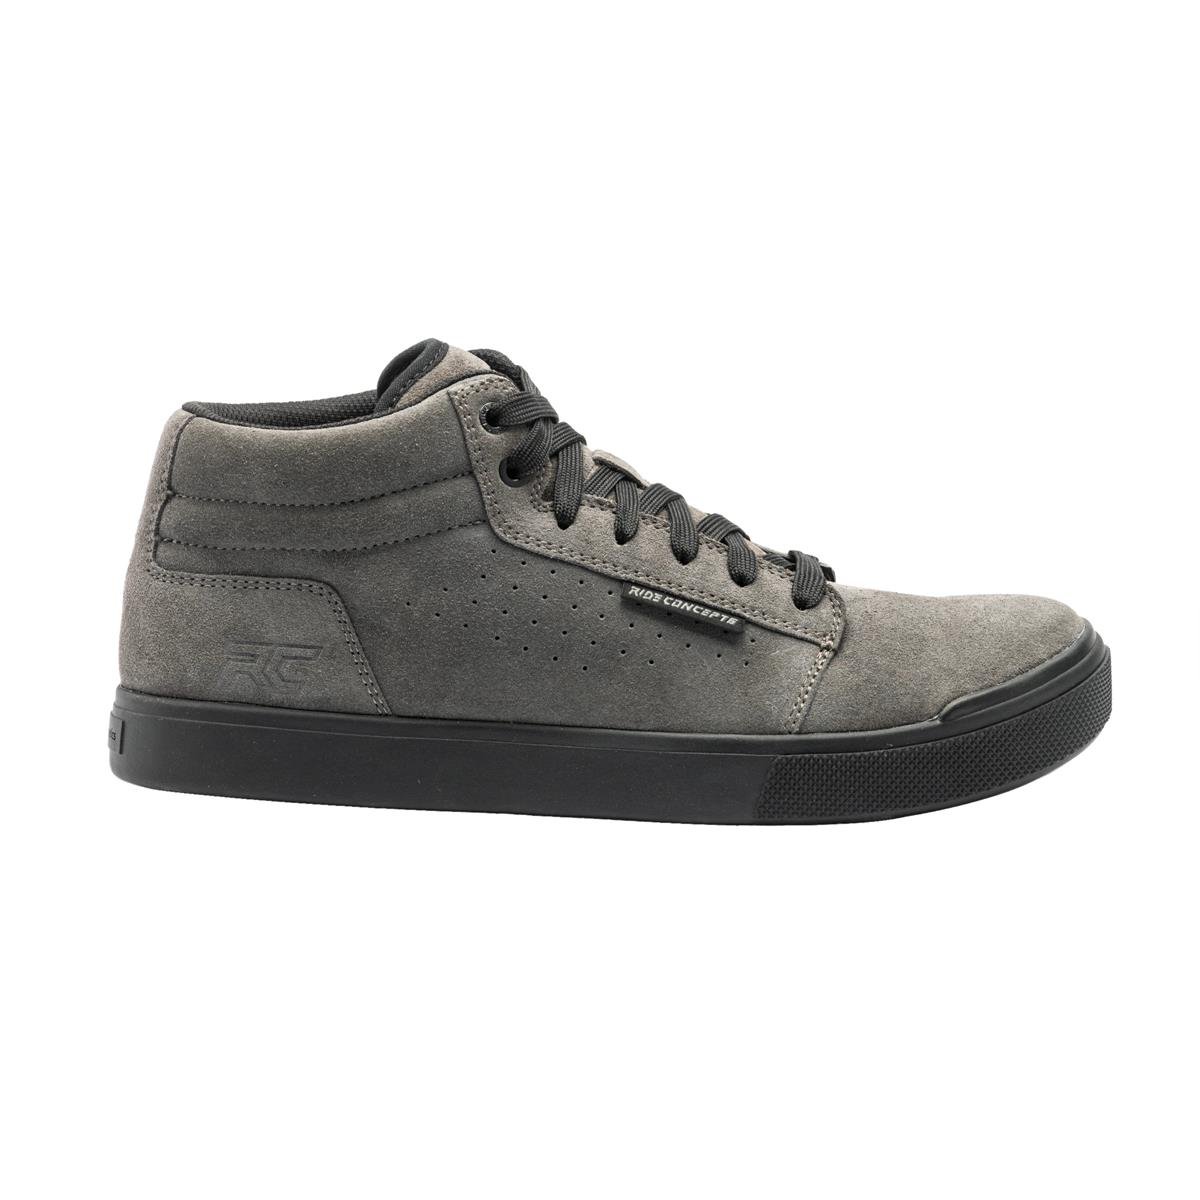 Ride Concepts Chaussures VTT Vice Mid Gris